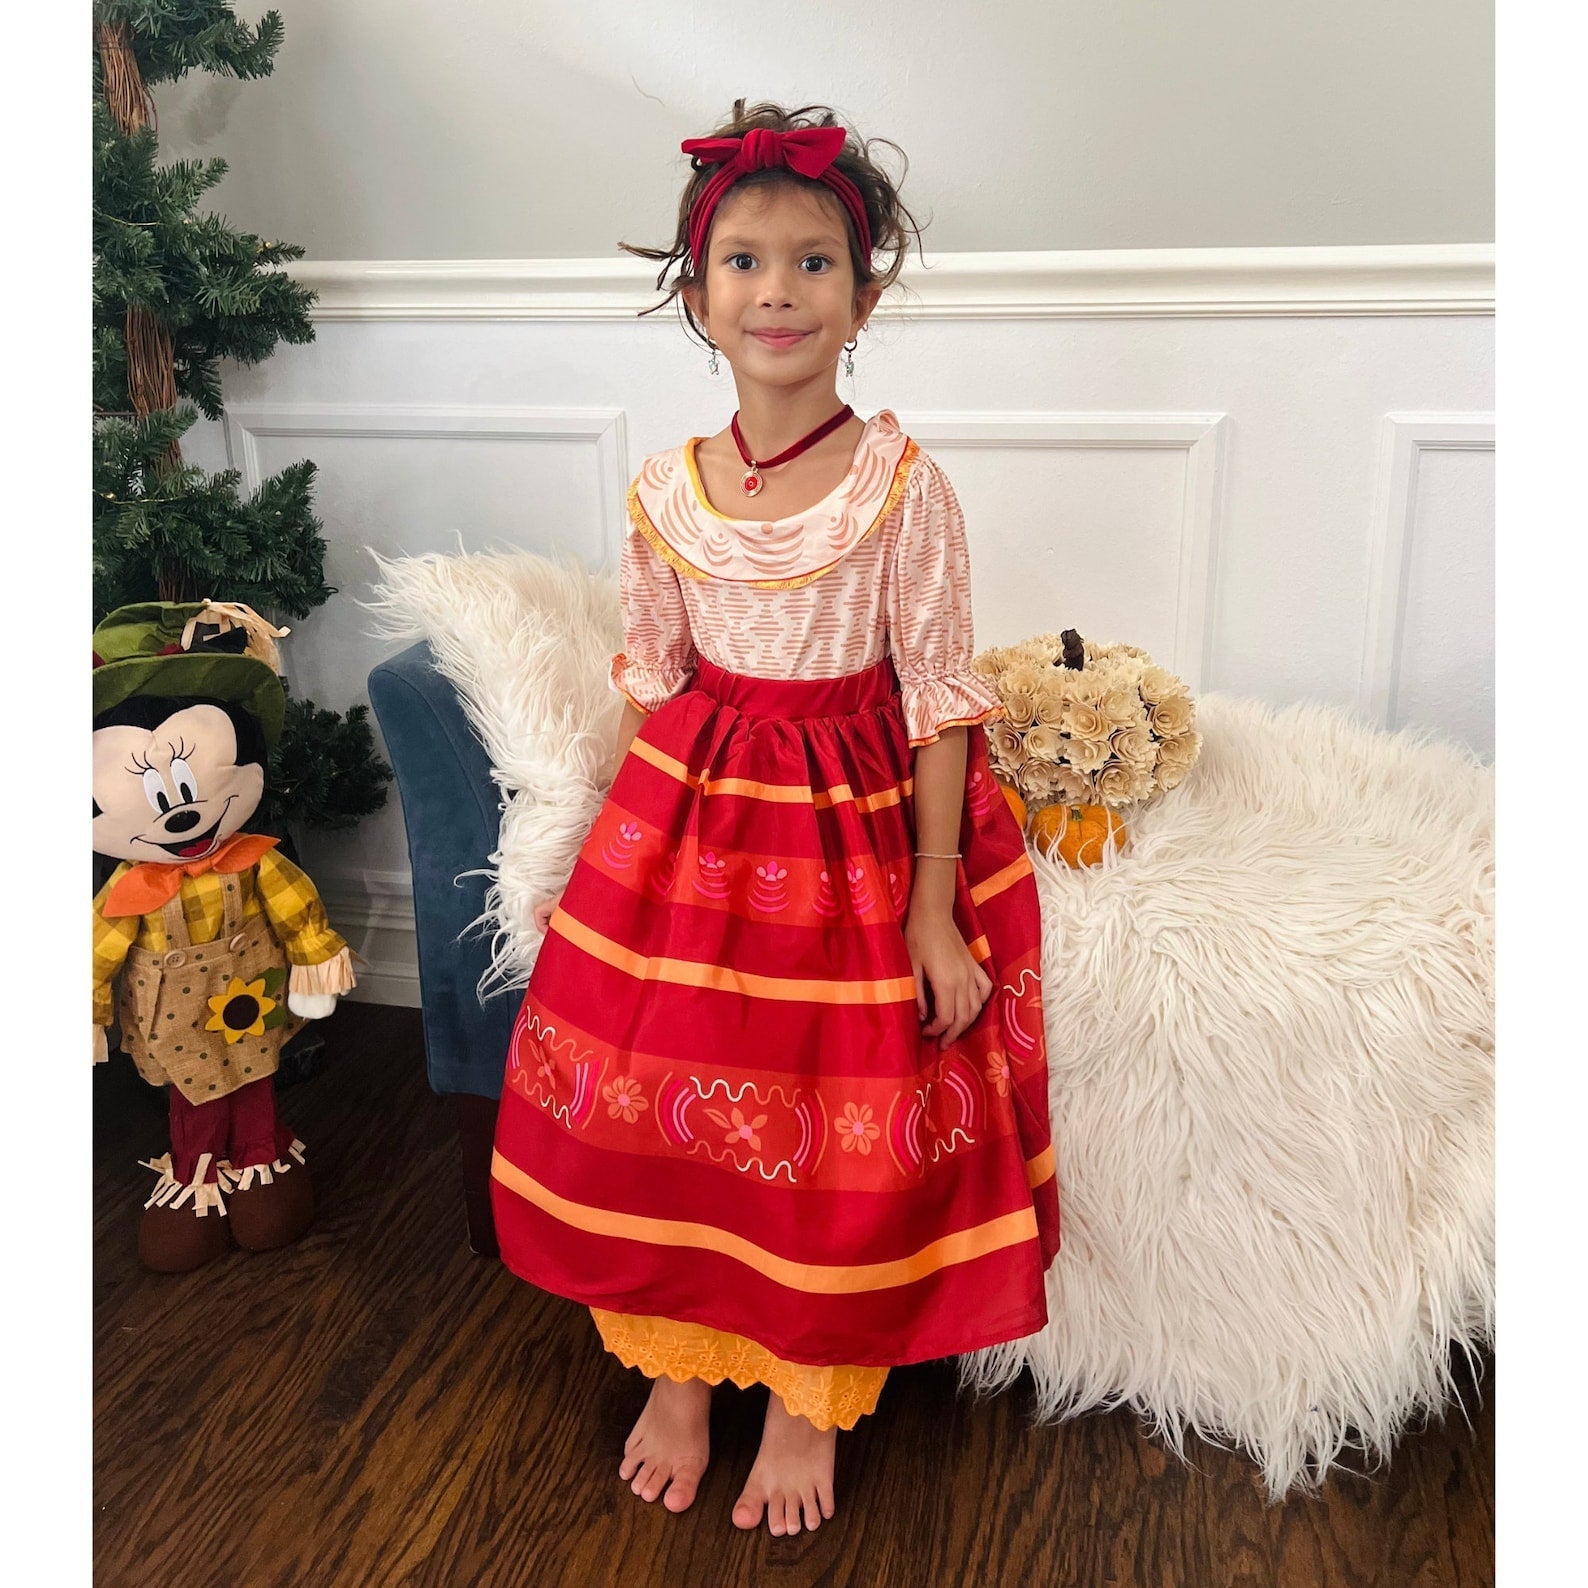 Encanto Dolores Dress with Beautiful Cotton Lace Trim, Costume Set with Headpiece, Earrings, and Necklace